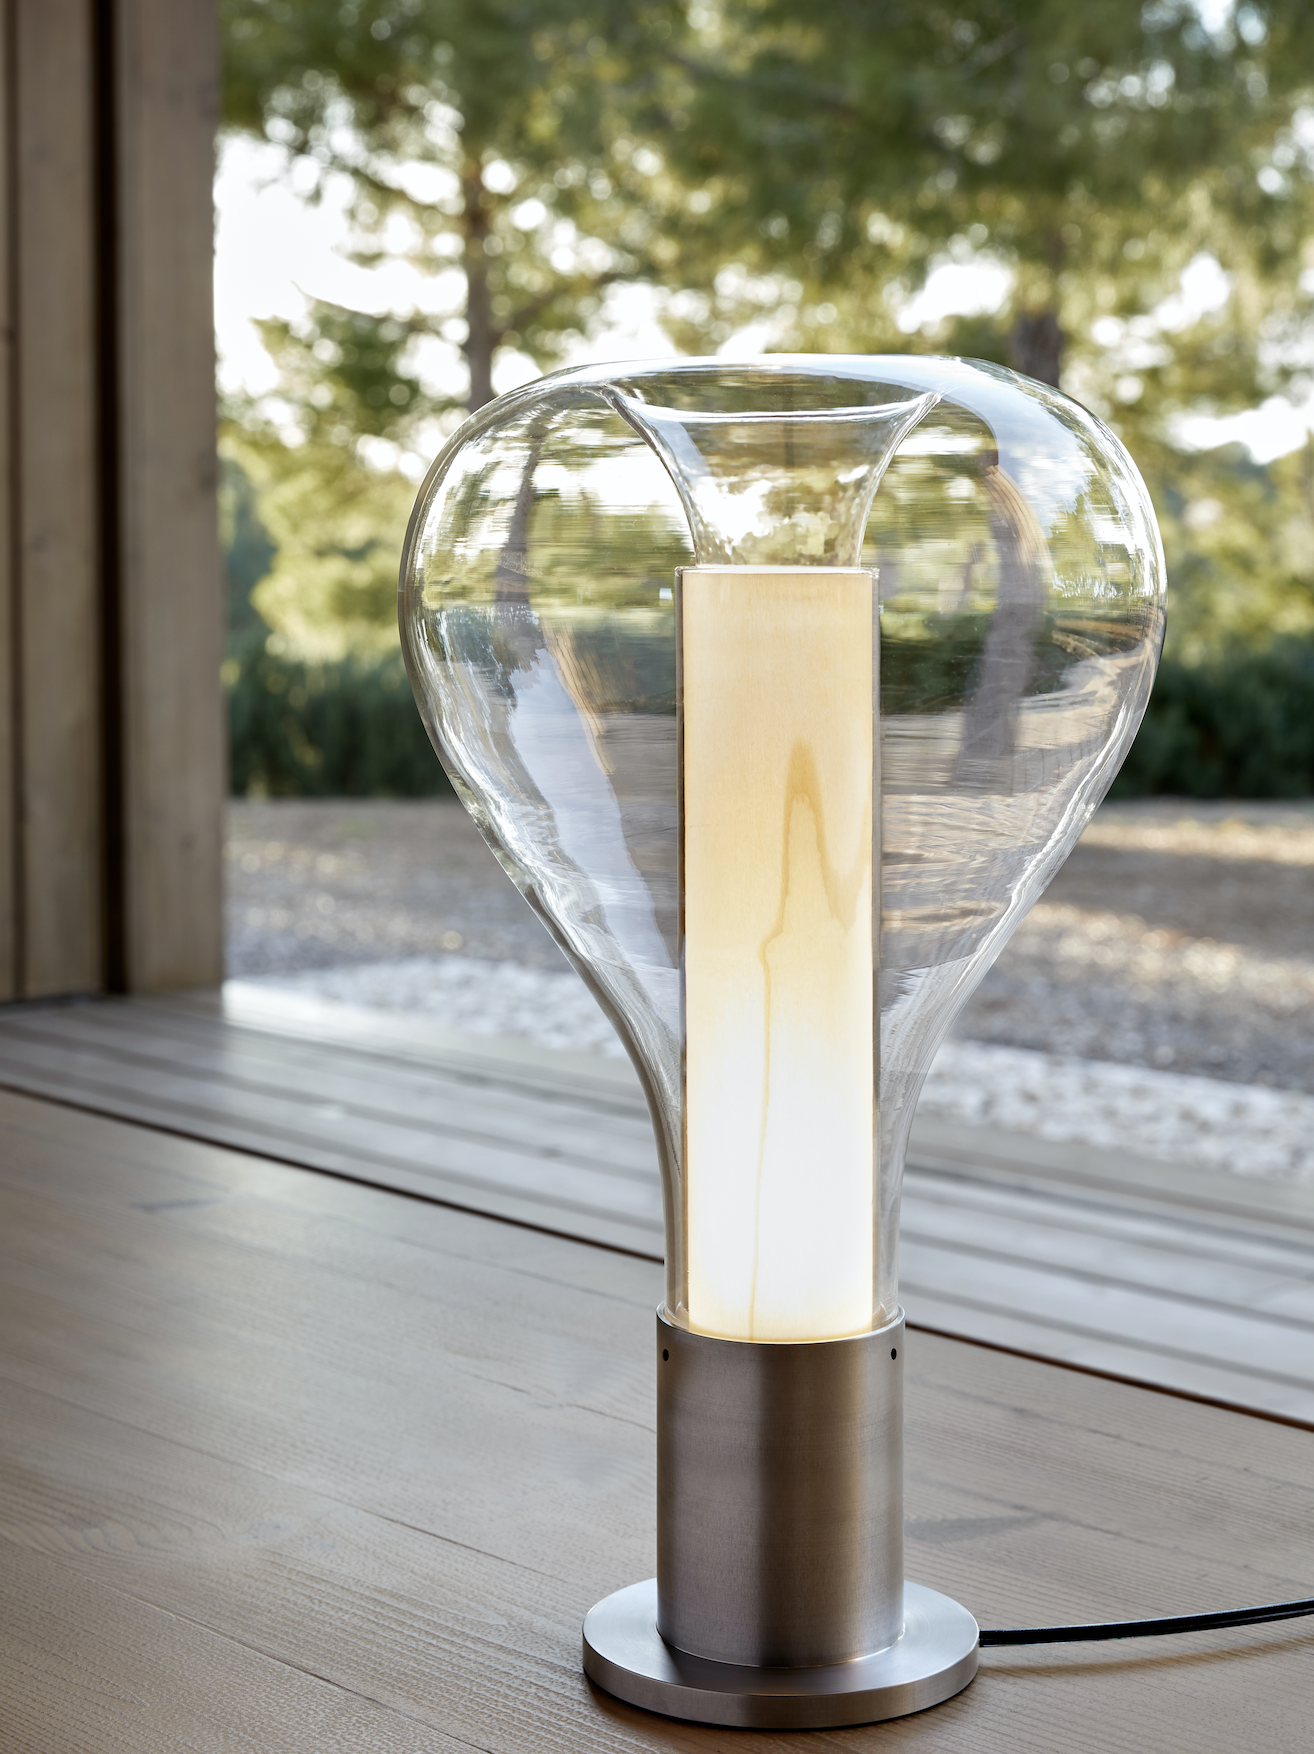 Eris light, wood and glass, by LZF